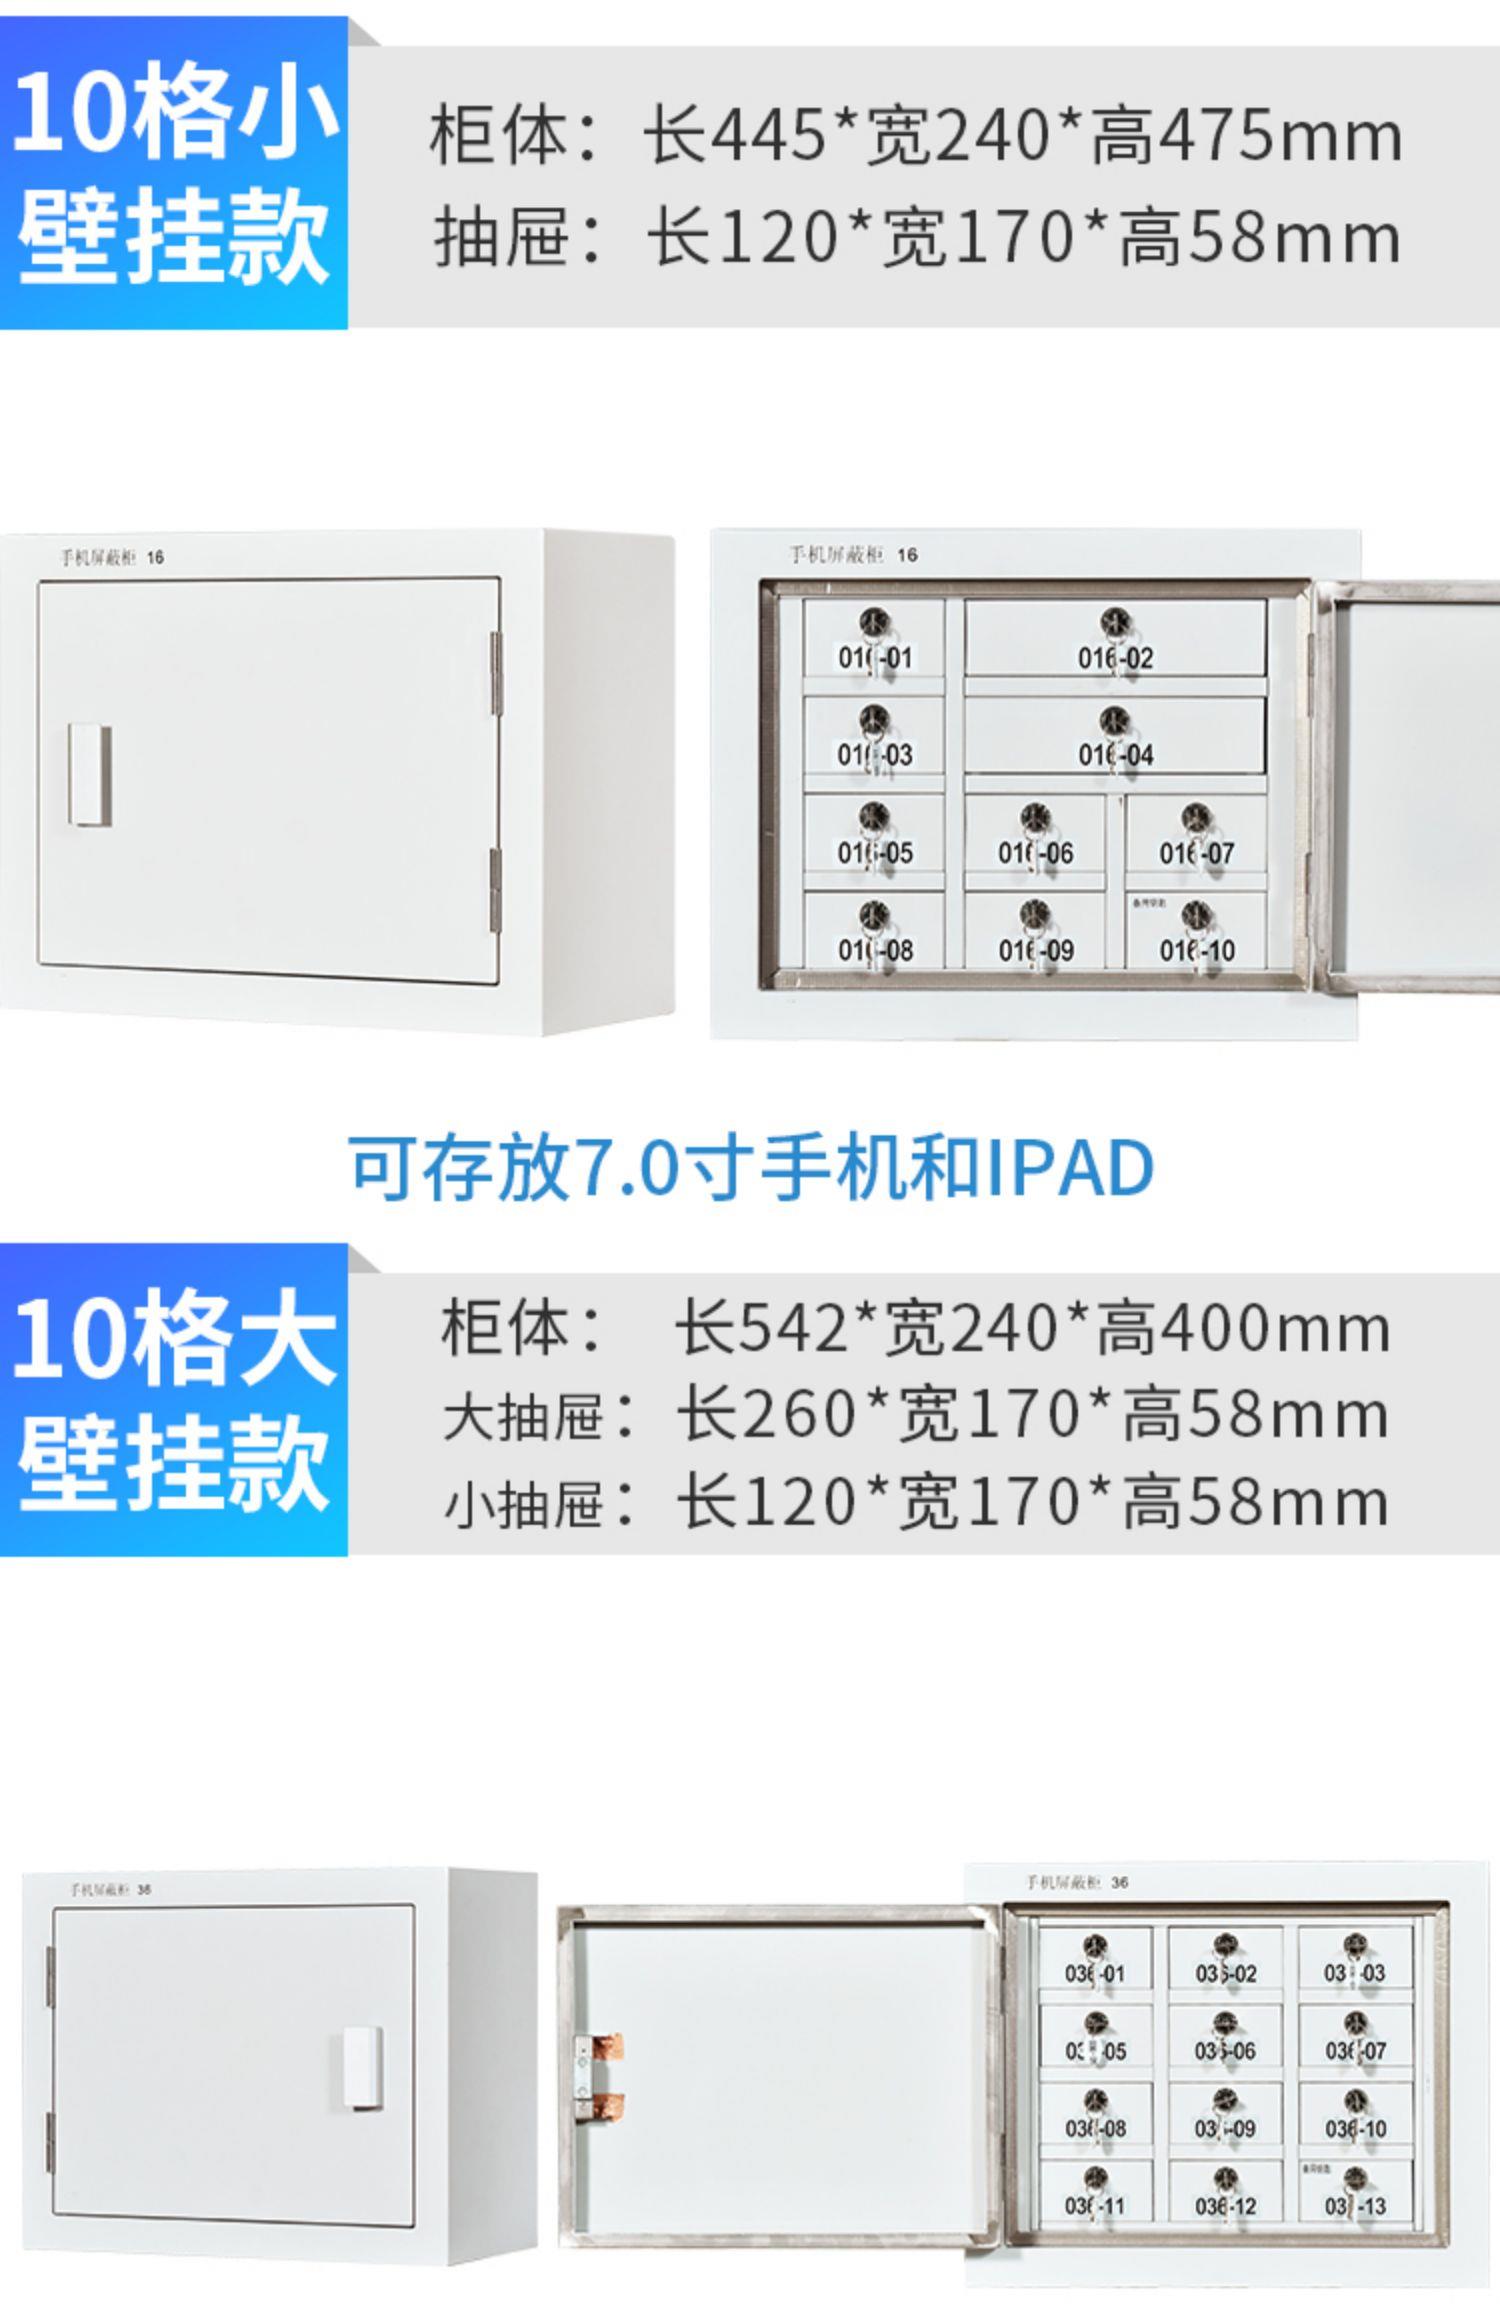 Mobile phone signal physical shielding cabinet storage cabinet storage room floor locked 20 grid security cabinet